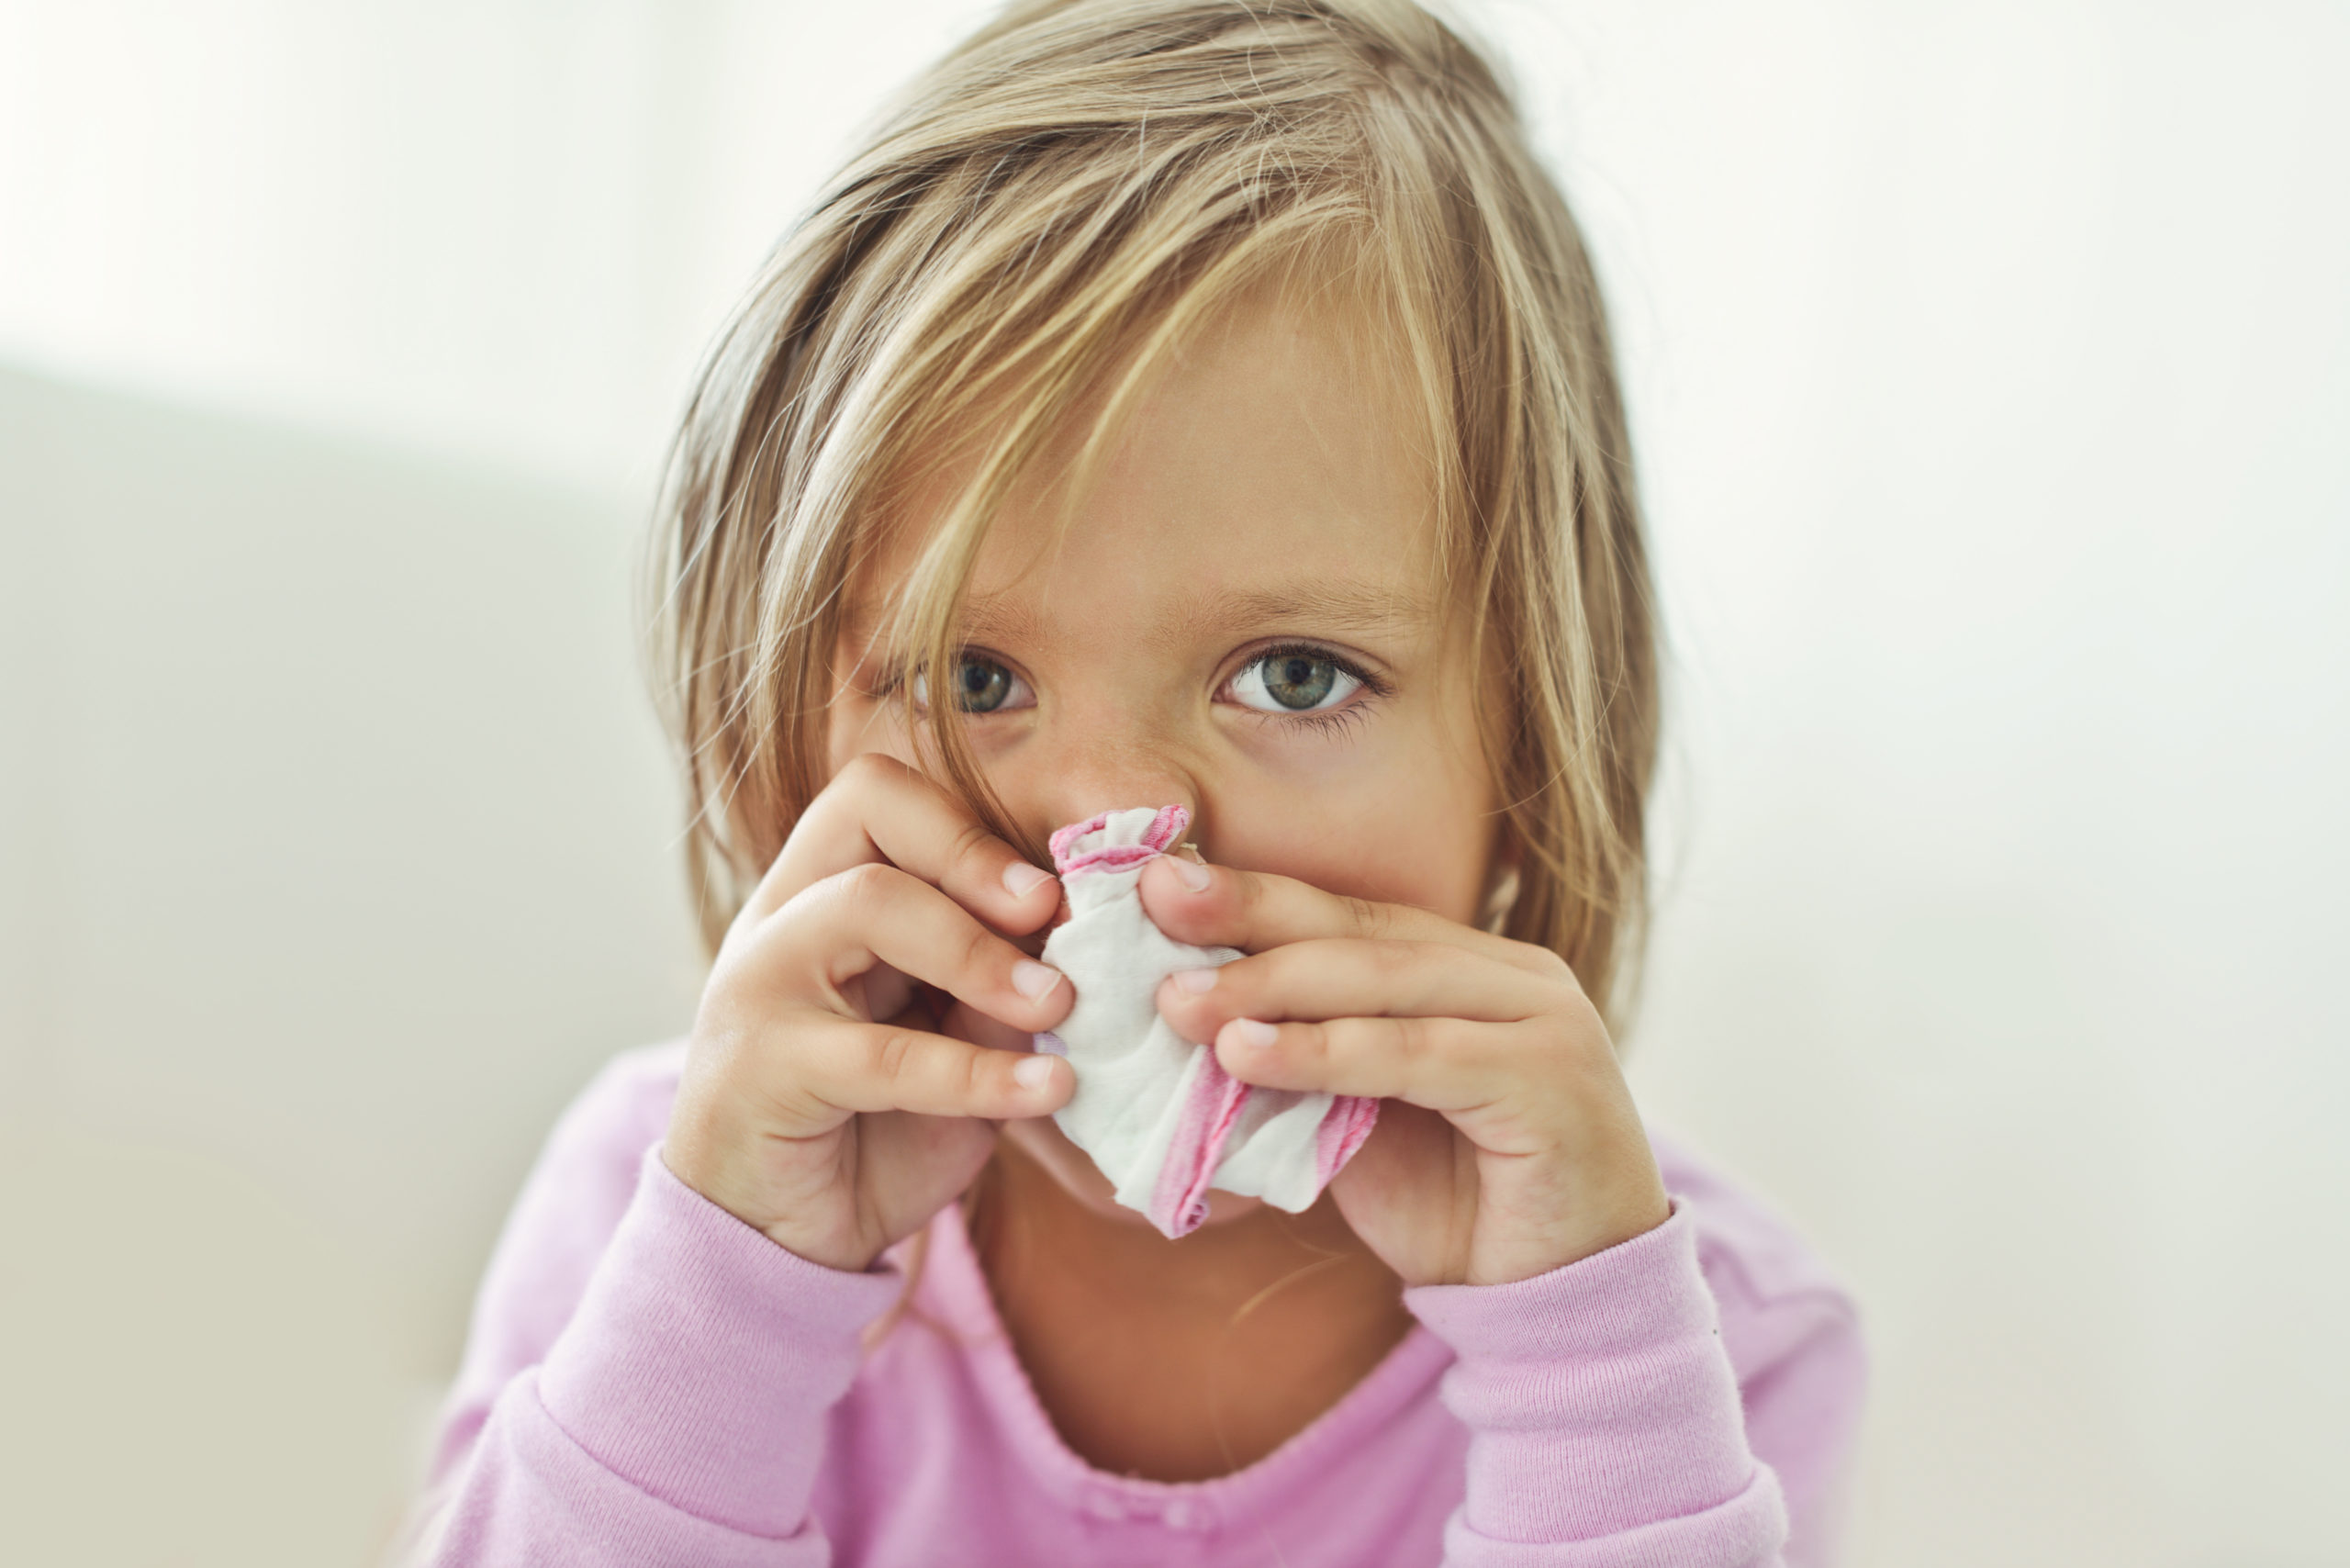 5 Things to Know About Kids and Allergies